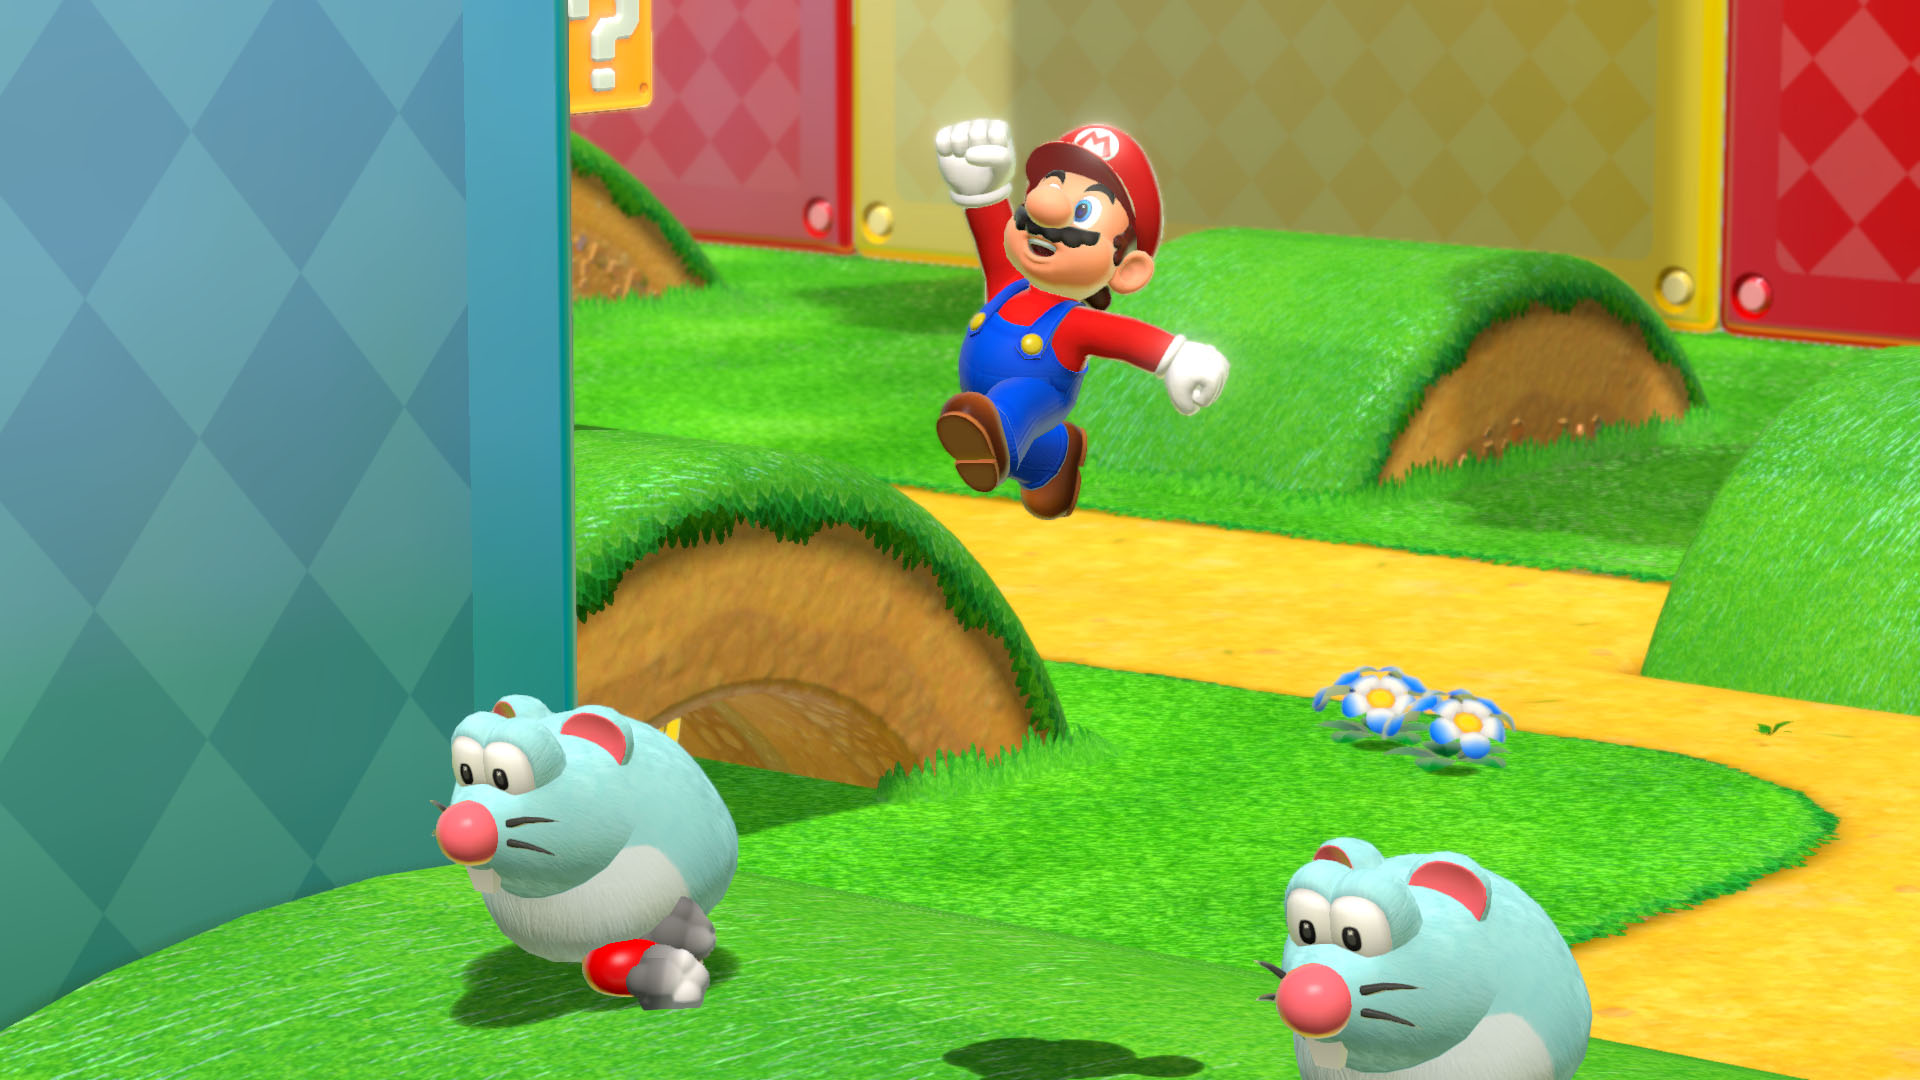 Super Mario 3D World,' 'A Link Between Worlds: 2 of this year's